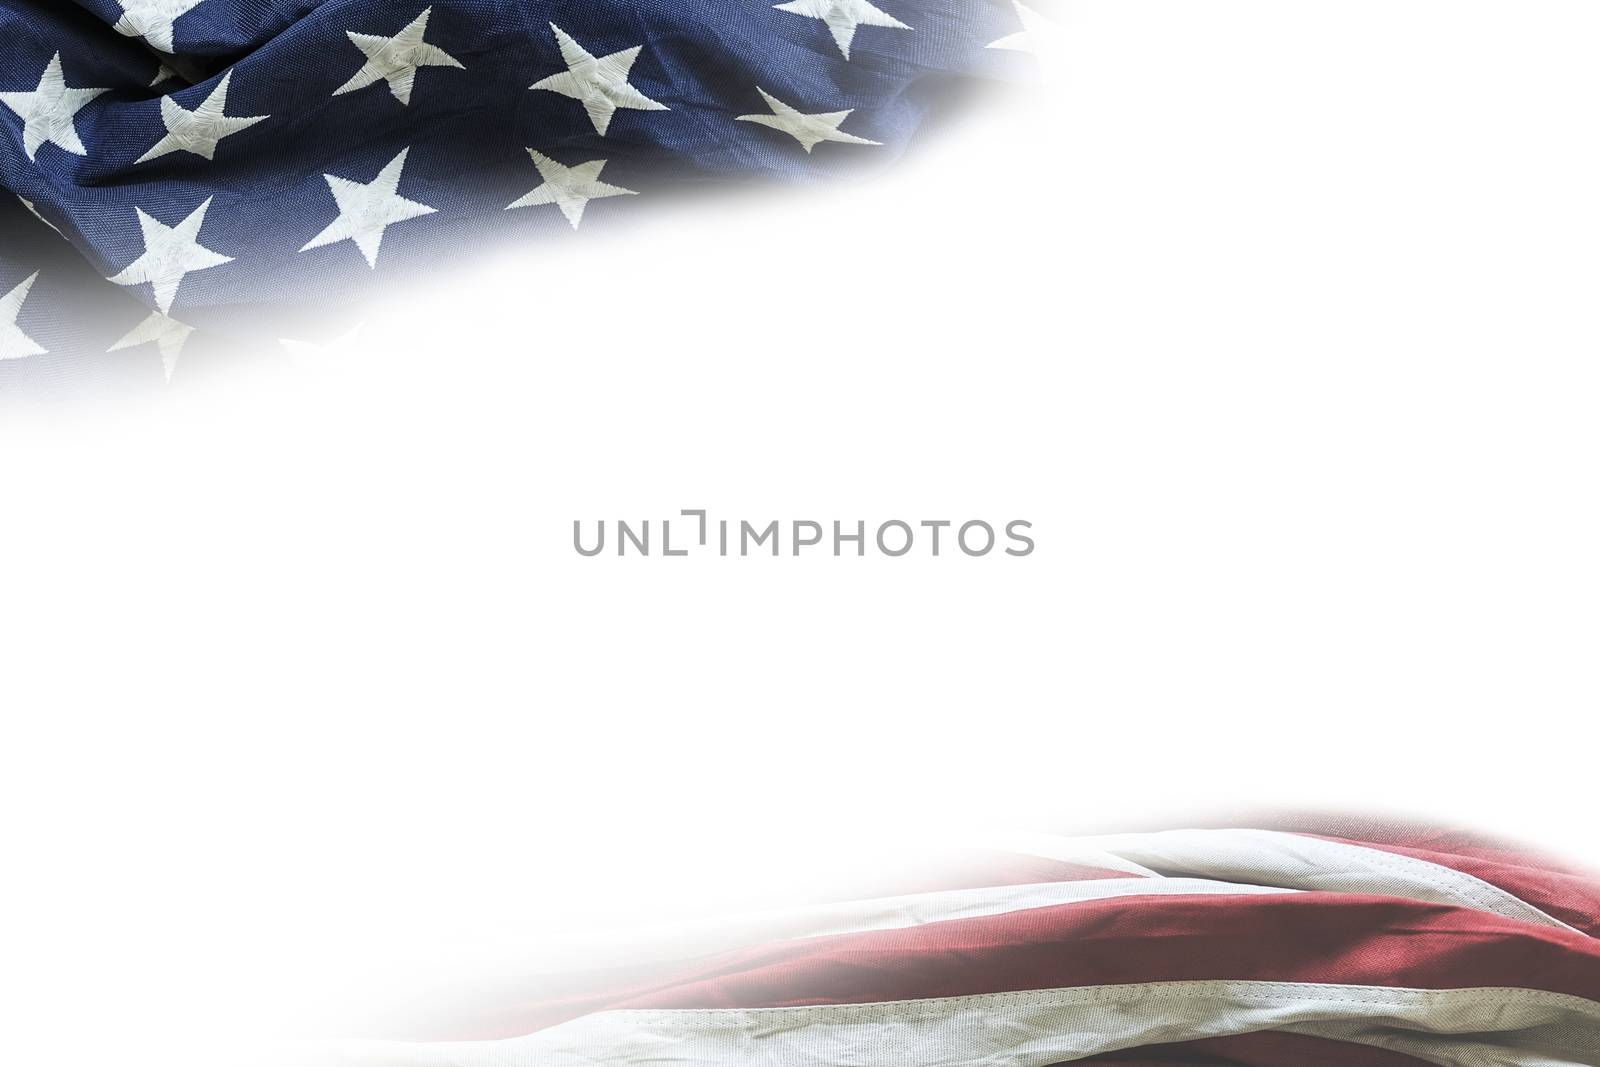 United States of America flag on white background with copy space